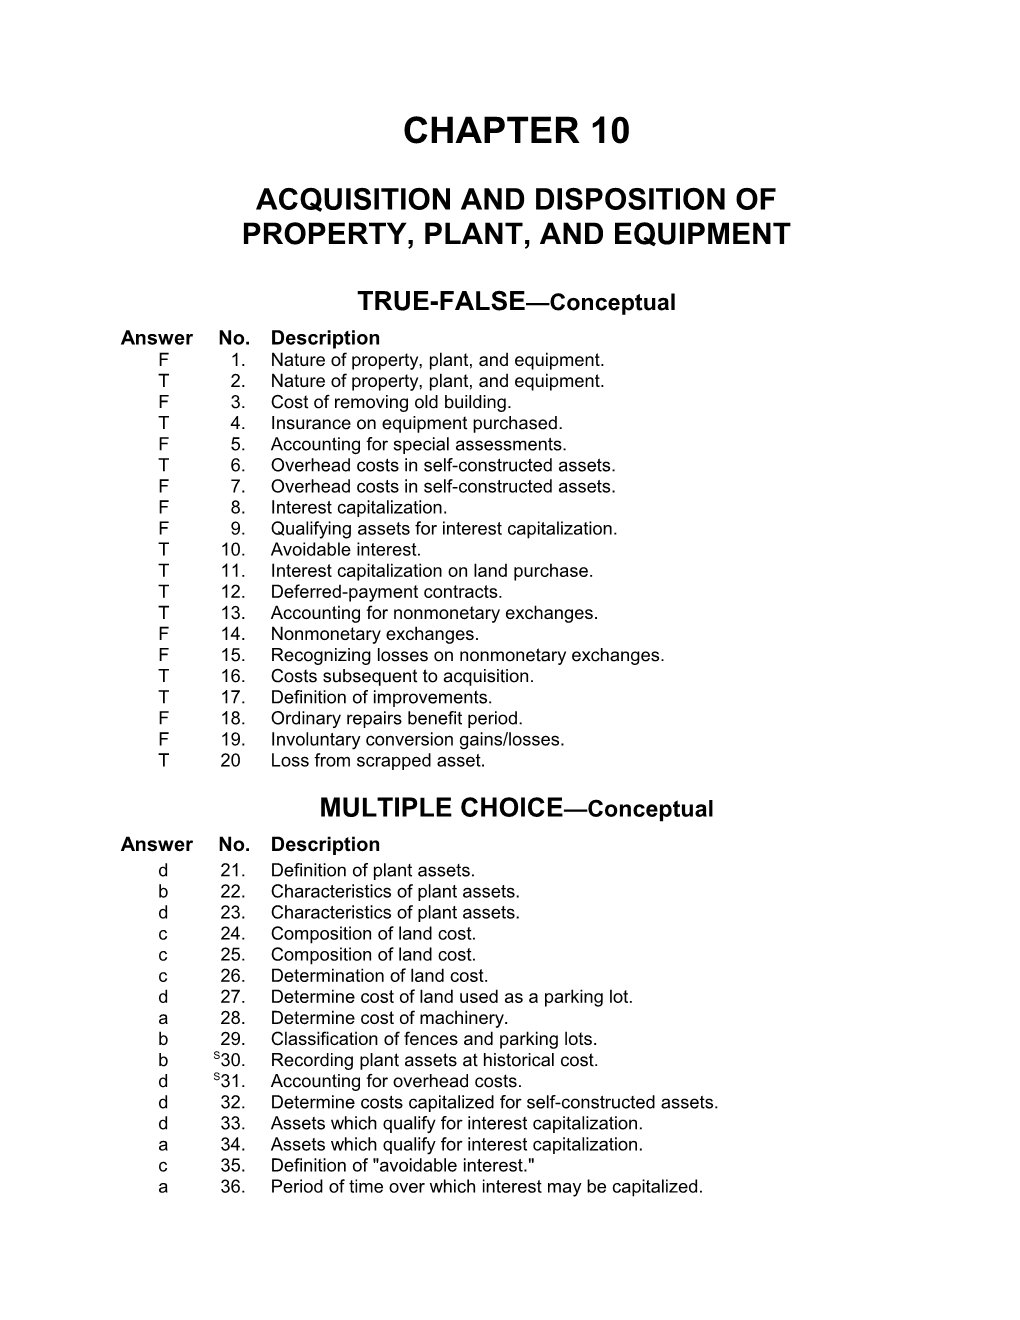 Acquisition and Disposition of Property, Plant, and Equipment